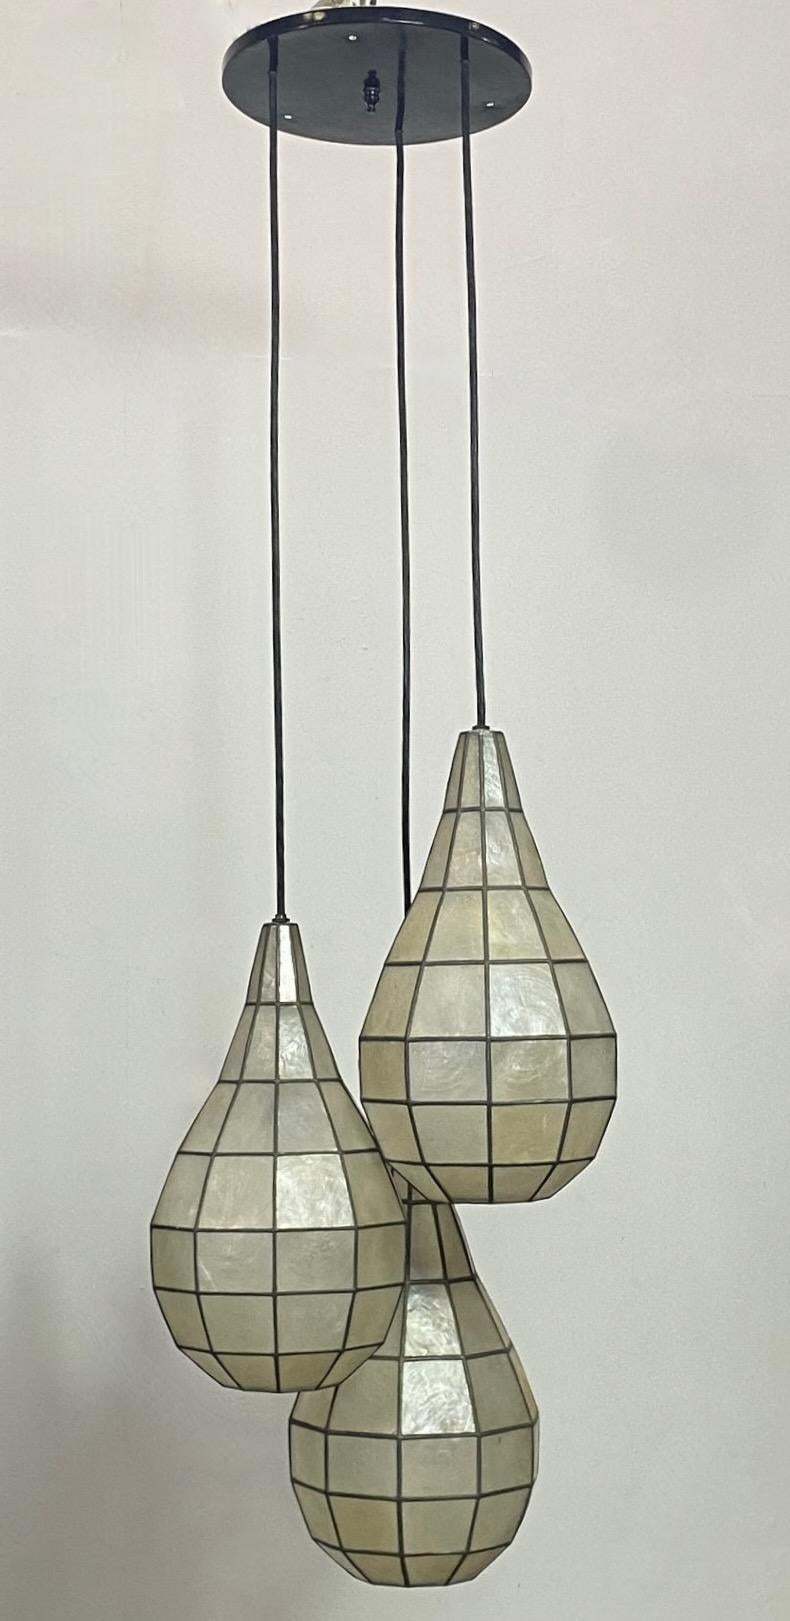 A unique Capiz shell light fixture with three hanging tear drop shape pendants.
A dramatic look that will work well with many styles of interior design.
Each shade measures 14.5 inches high.
Recently refreshed and re-wired.
American, 1950's-1960's.